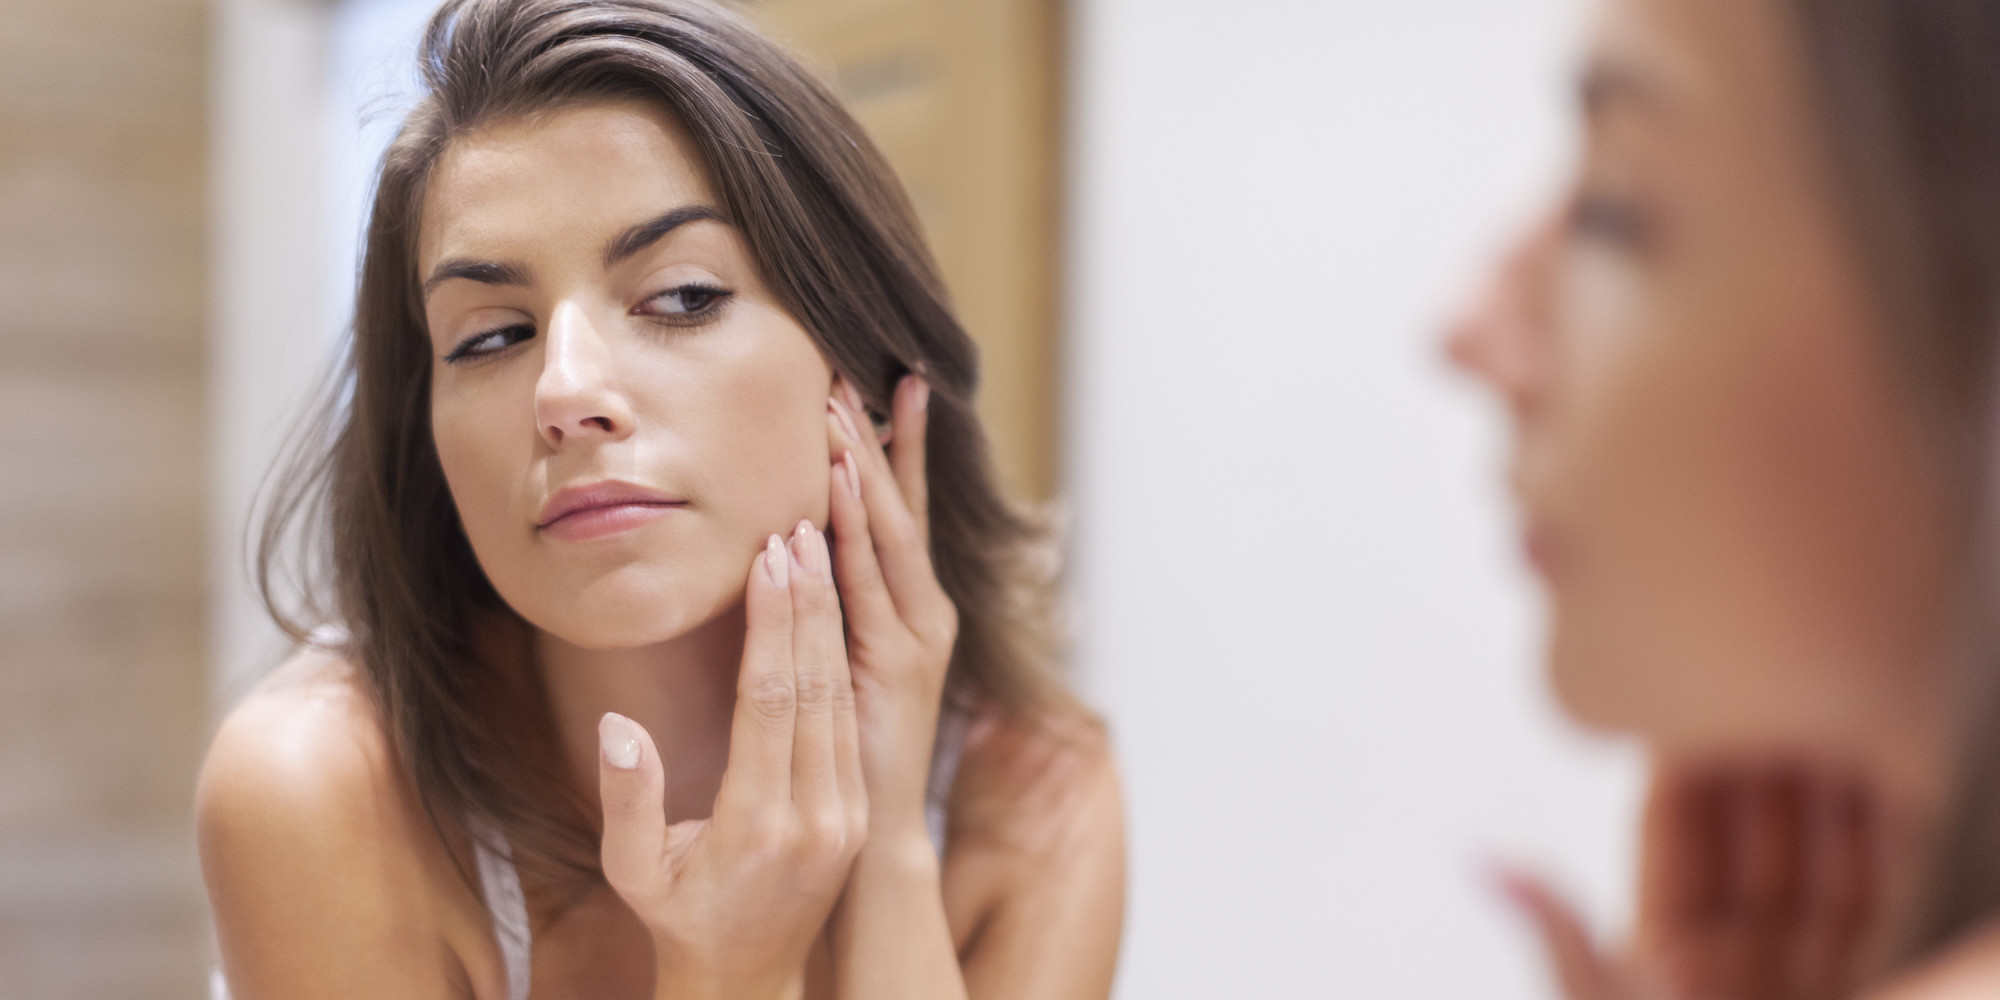 Could your protein shake be causing your acne?